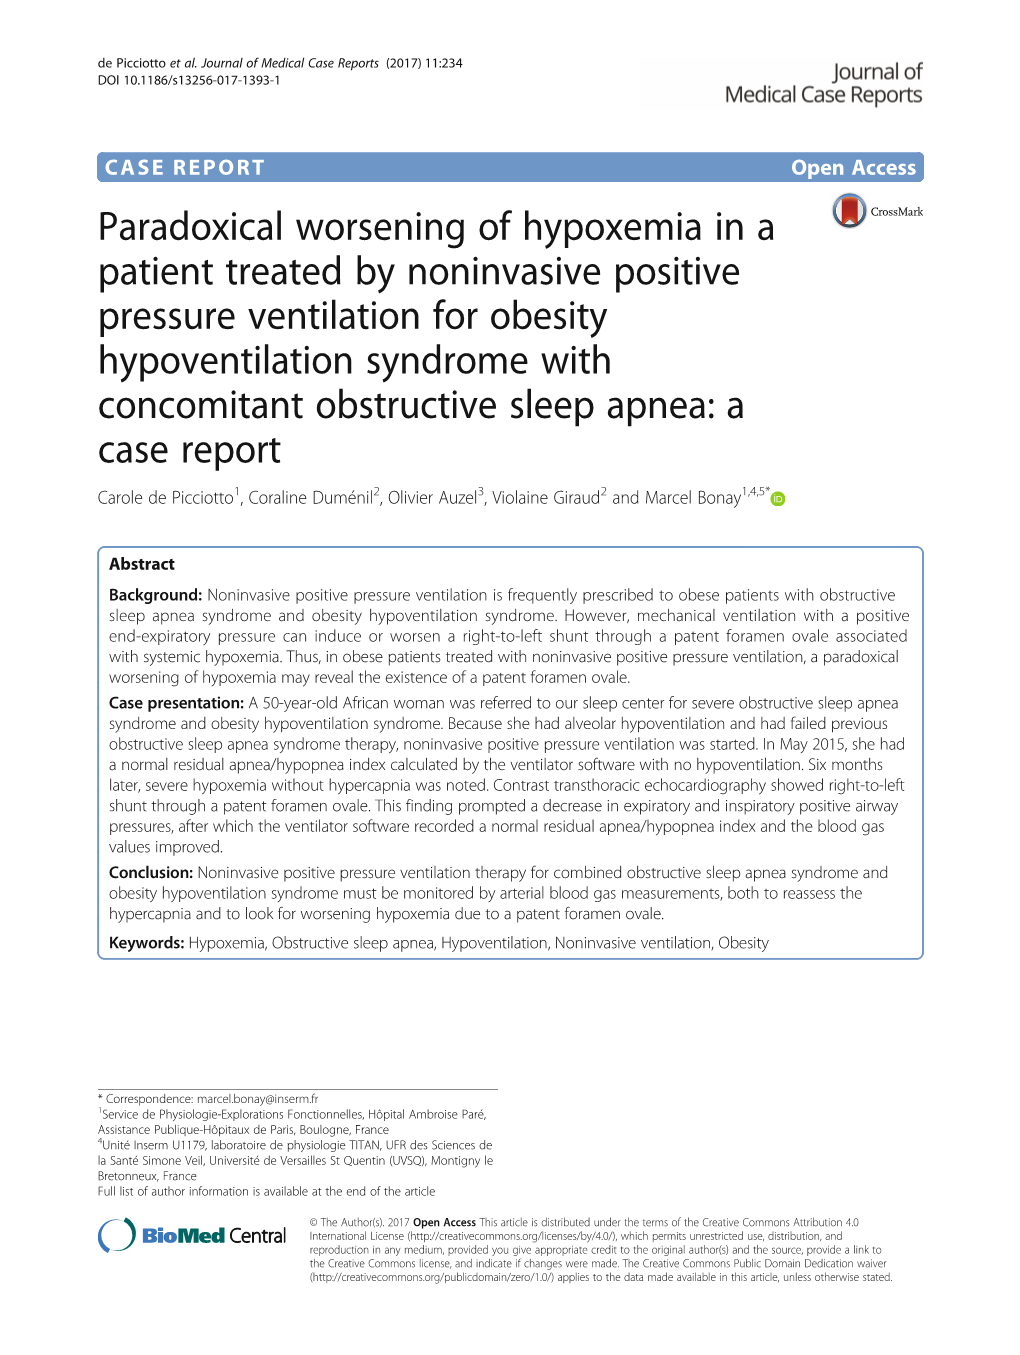 Paradoxical Worsening of Hypoxemia in a Patient Treated by Noninvasive Positive Pressure Ventilation for Obesity Hypoventilation